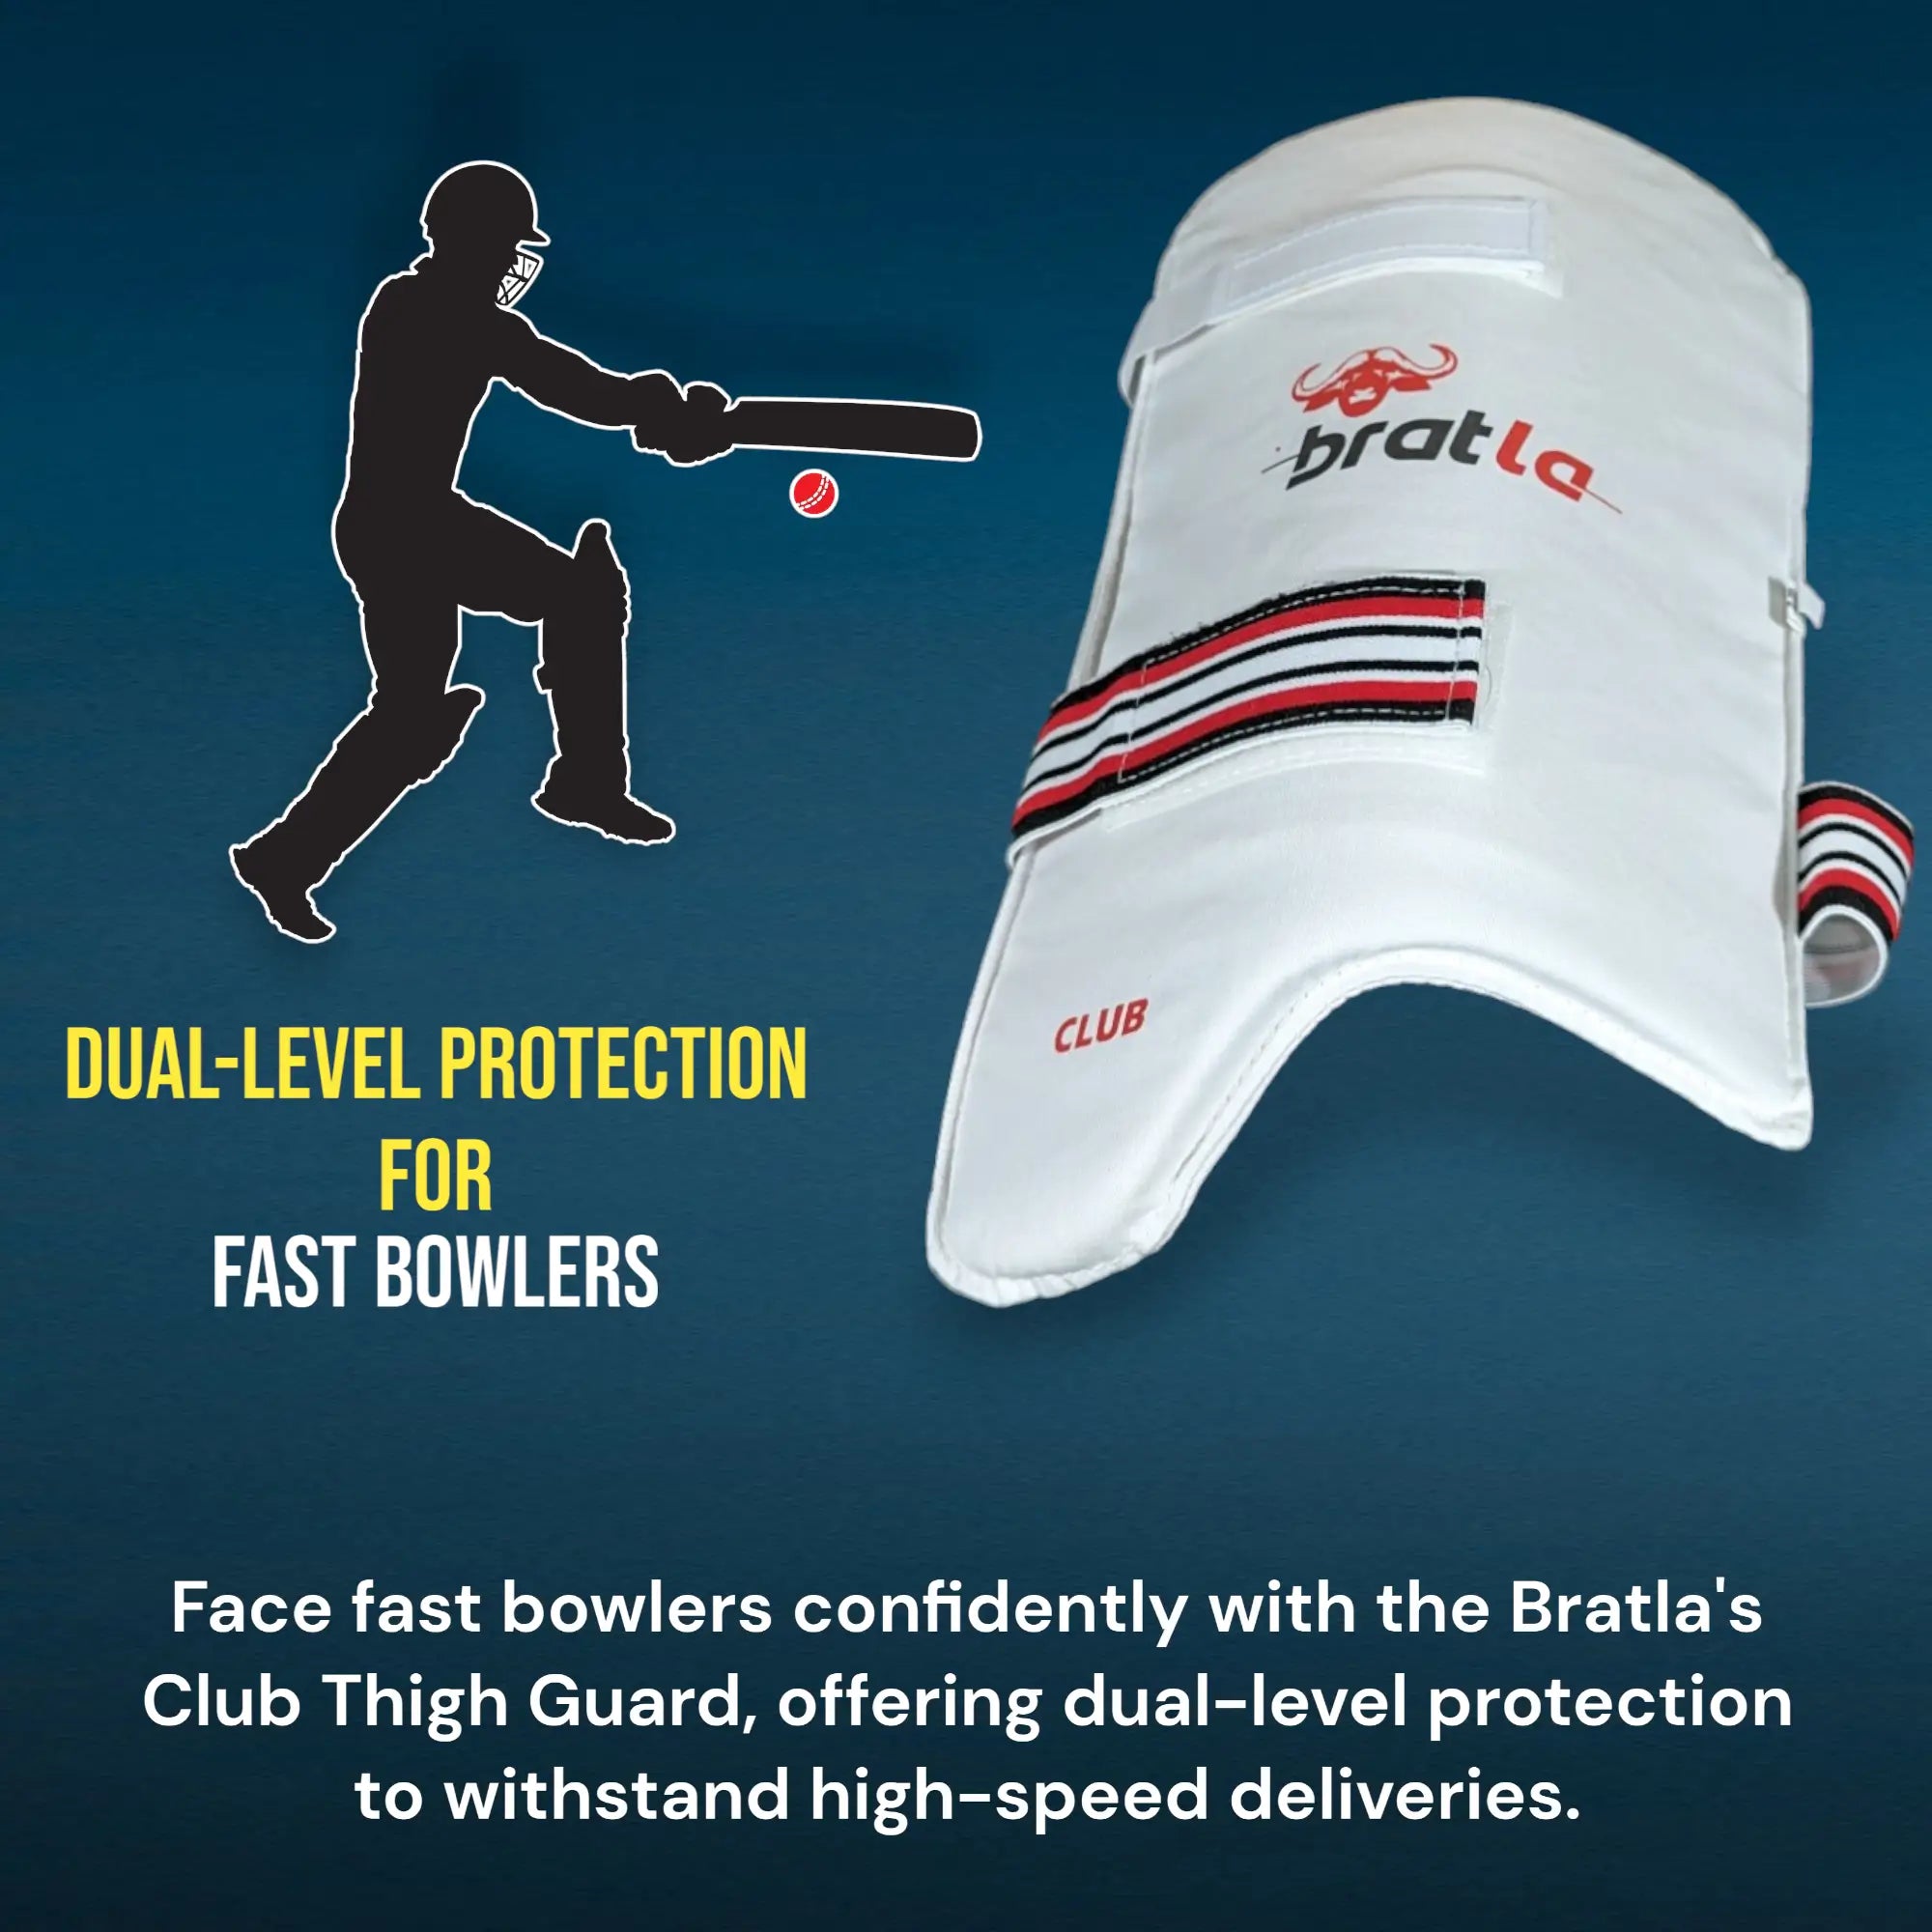 Cricket Club Thigh Pad Protector Foam Padded Super Lightweight - BODY PROTECTORS - THIGH GUARD